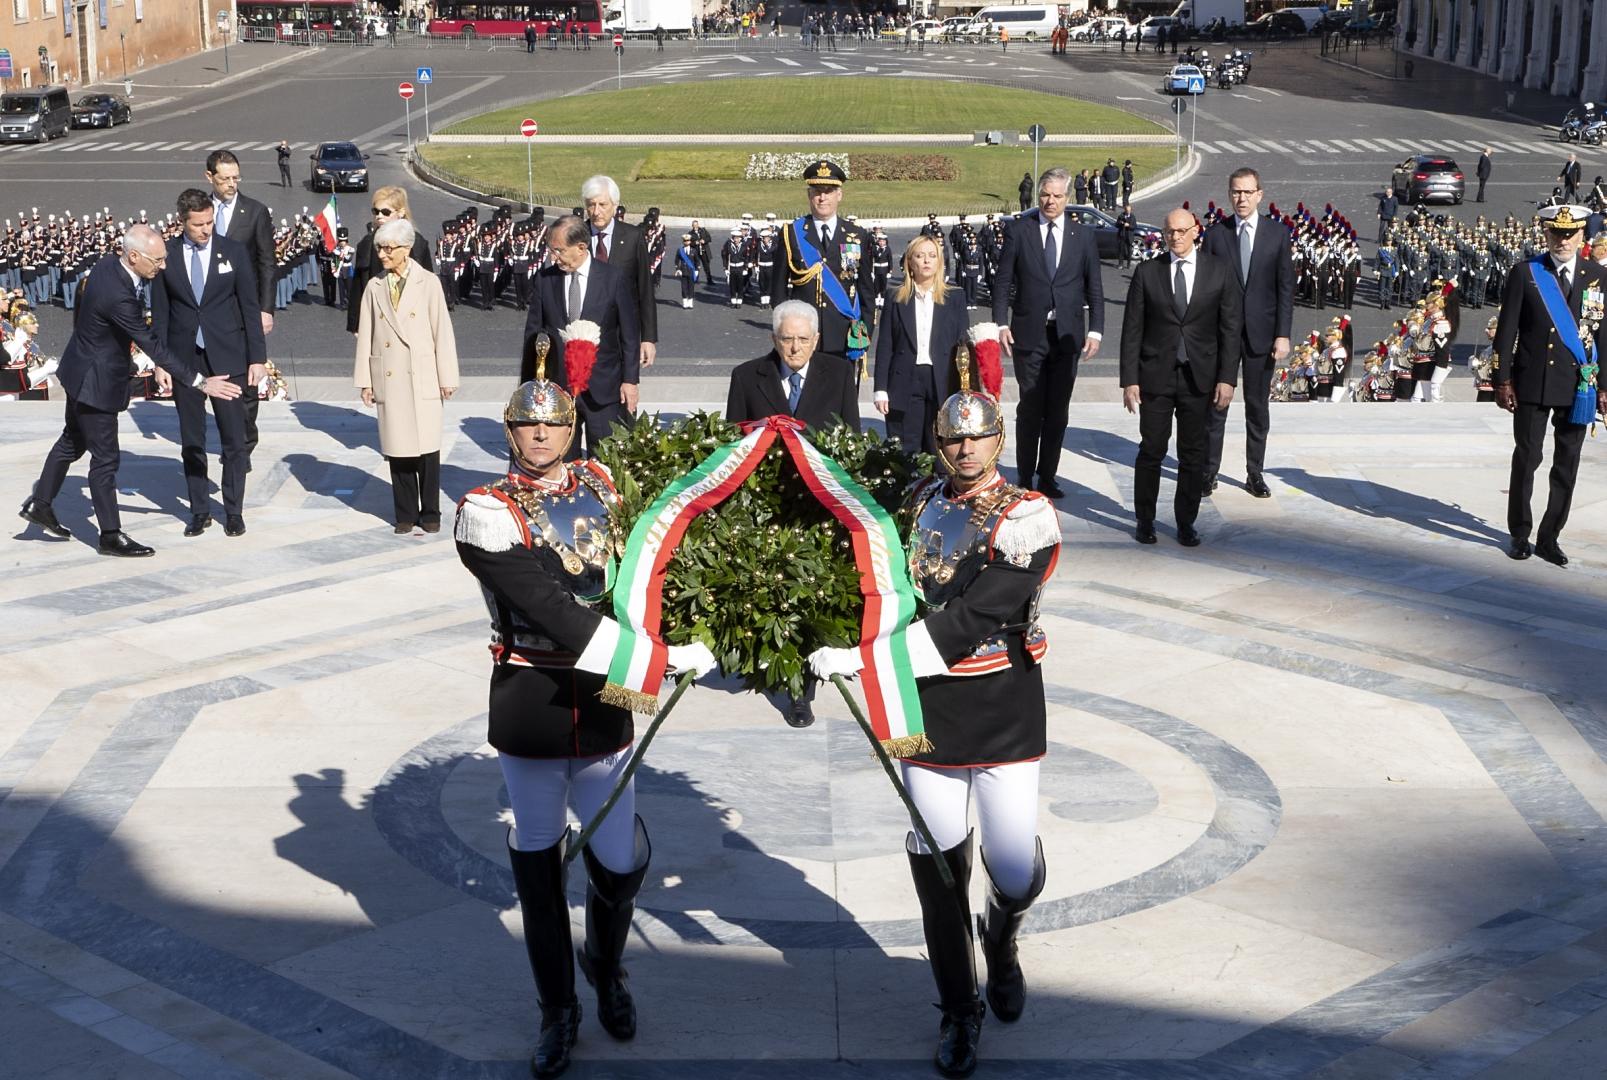 Unification Day: the President of the Republic lays laurel wreath at the Tomb of the Unknown Soldier. 